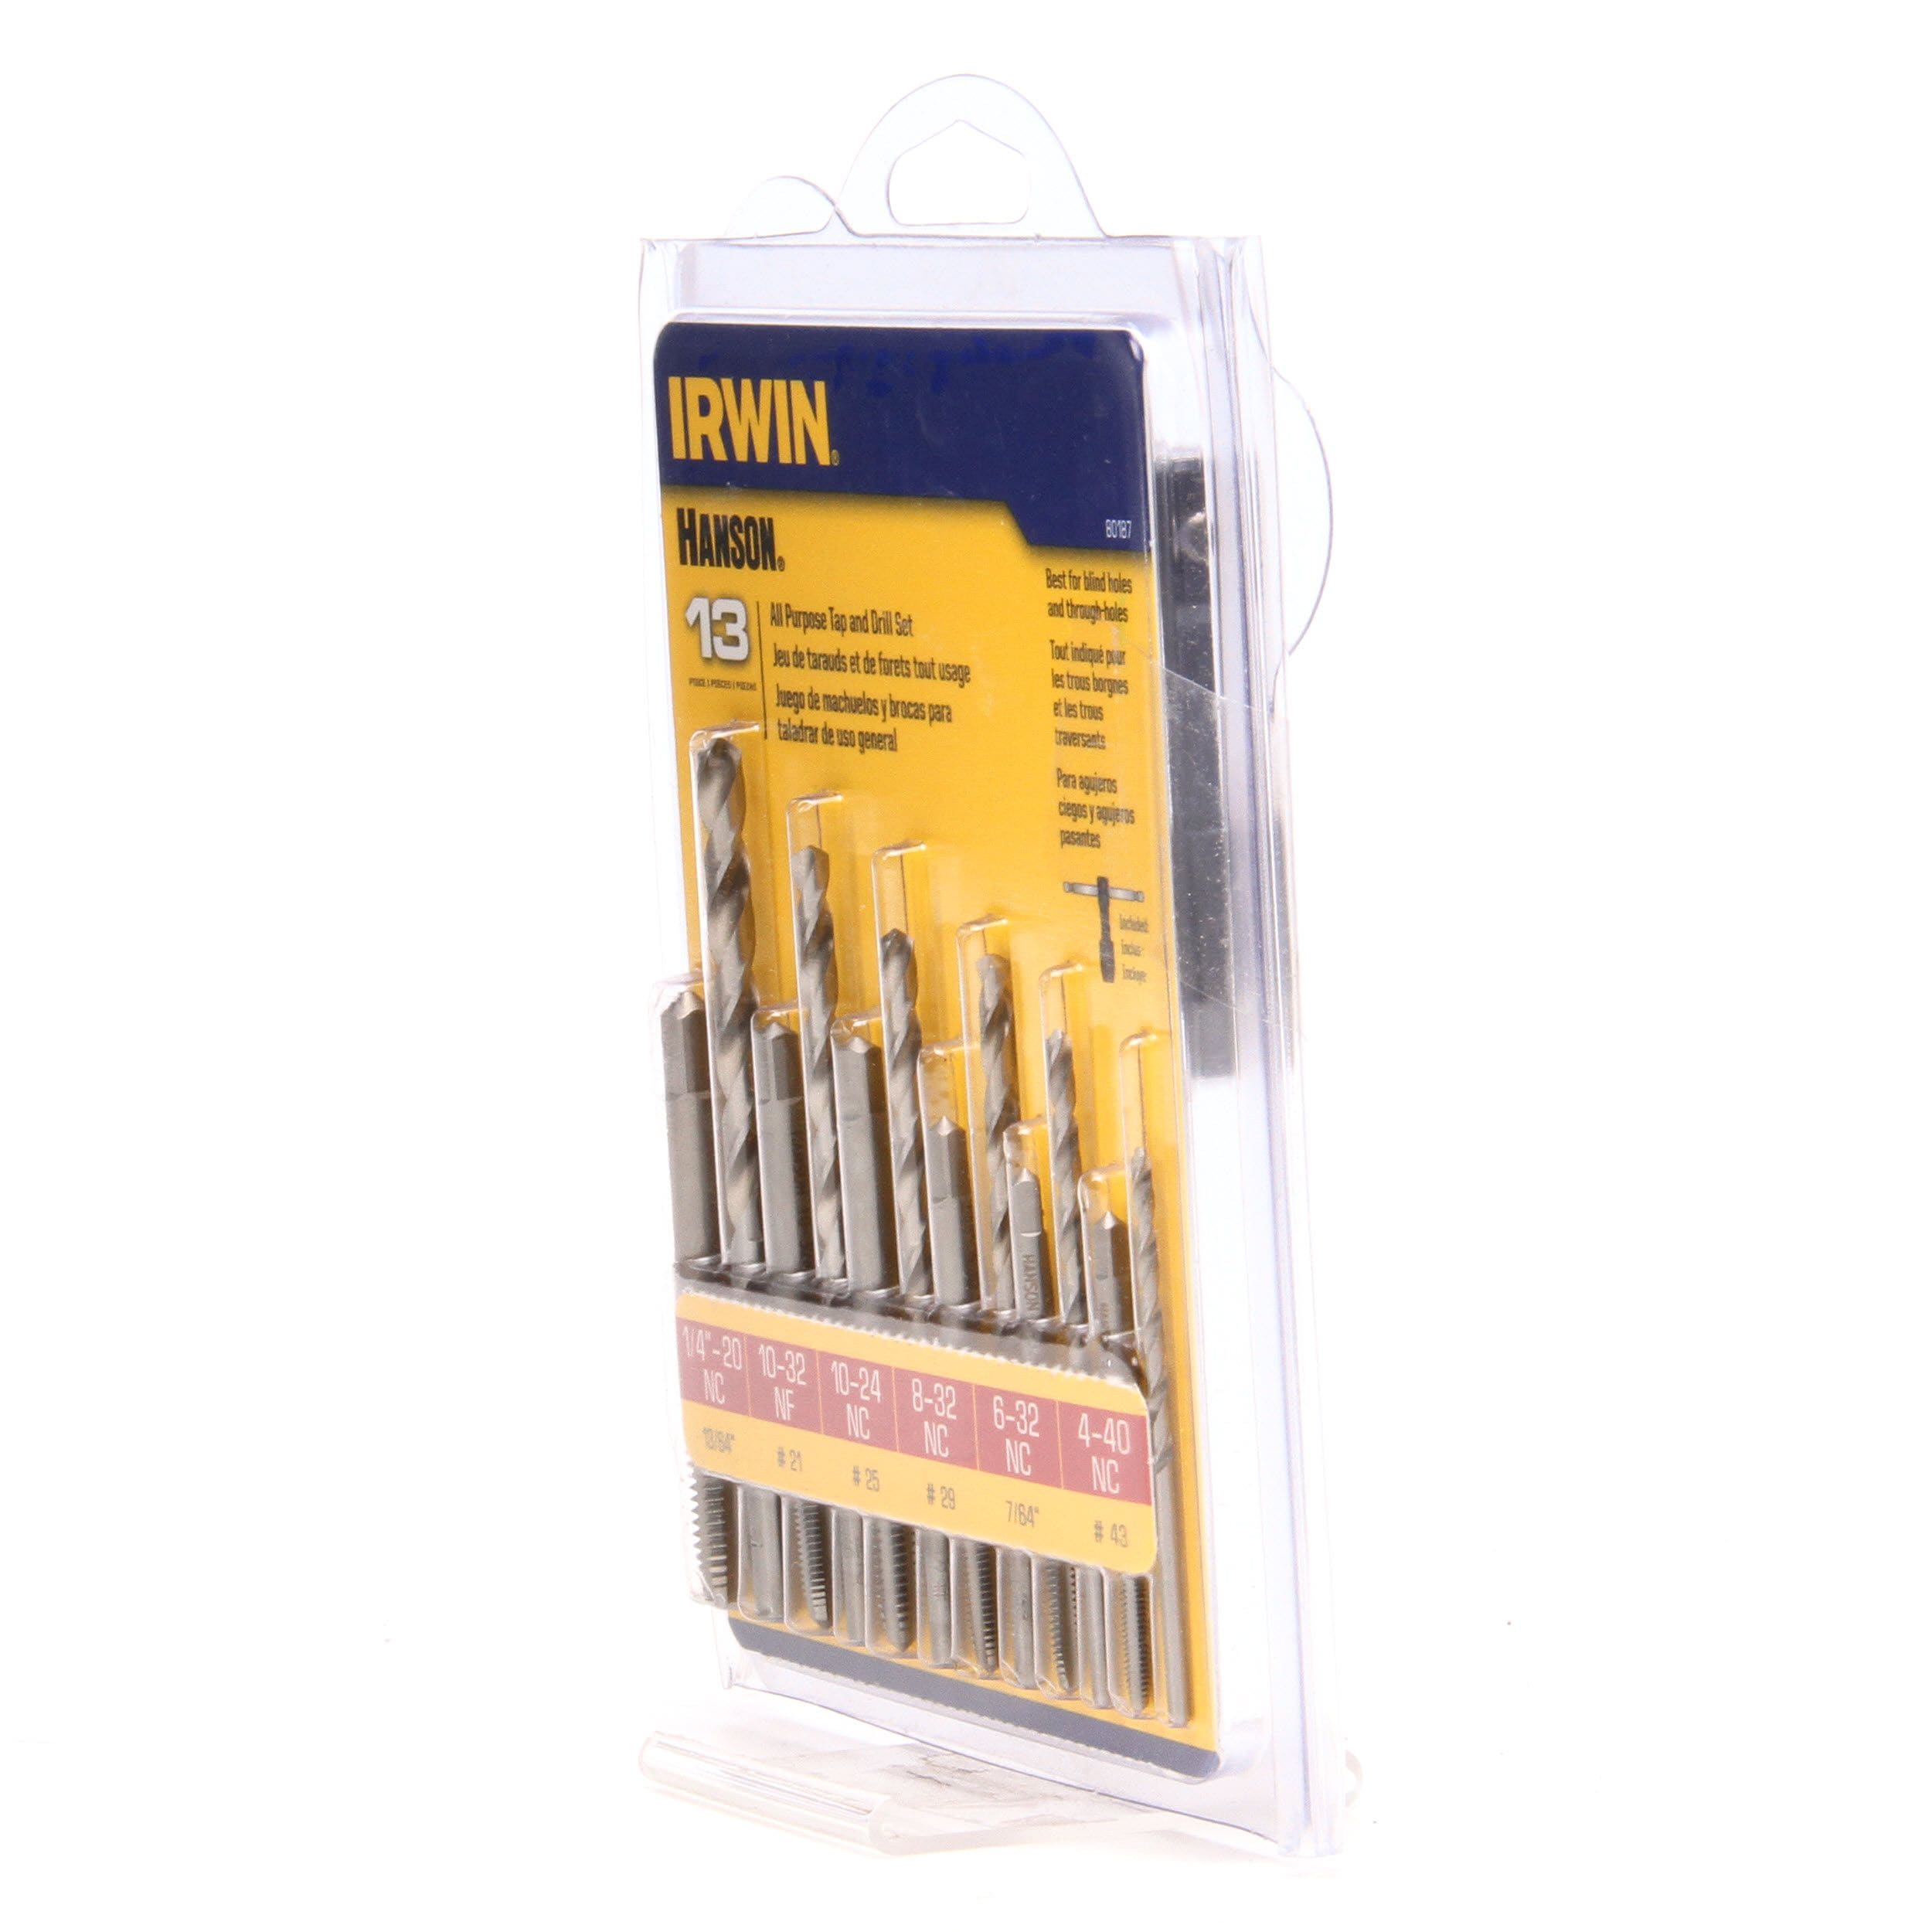 NEW IRWIN 8144 CARBON STEEL QUALITY 1/2-13 SAE QUALITY THREAD CUTTING DRILL TAP 